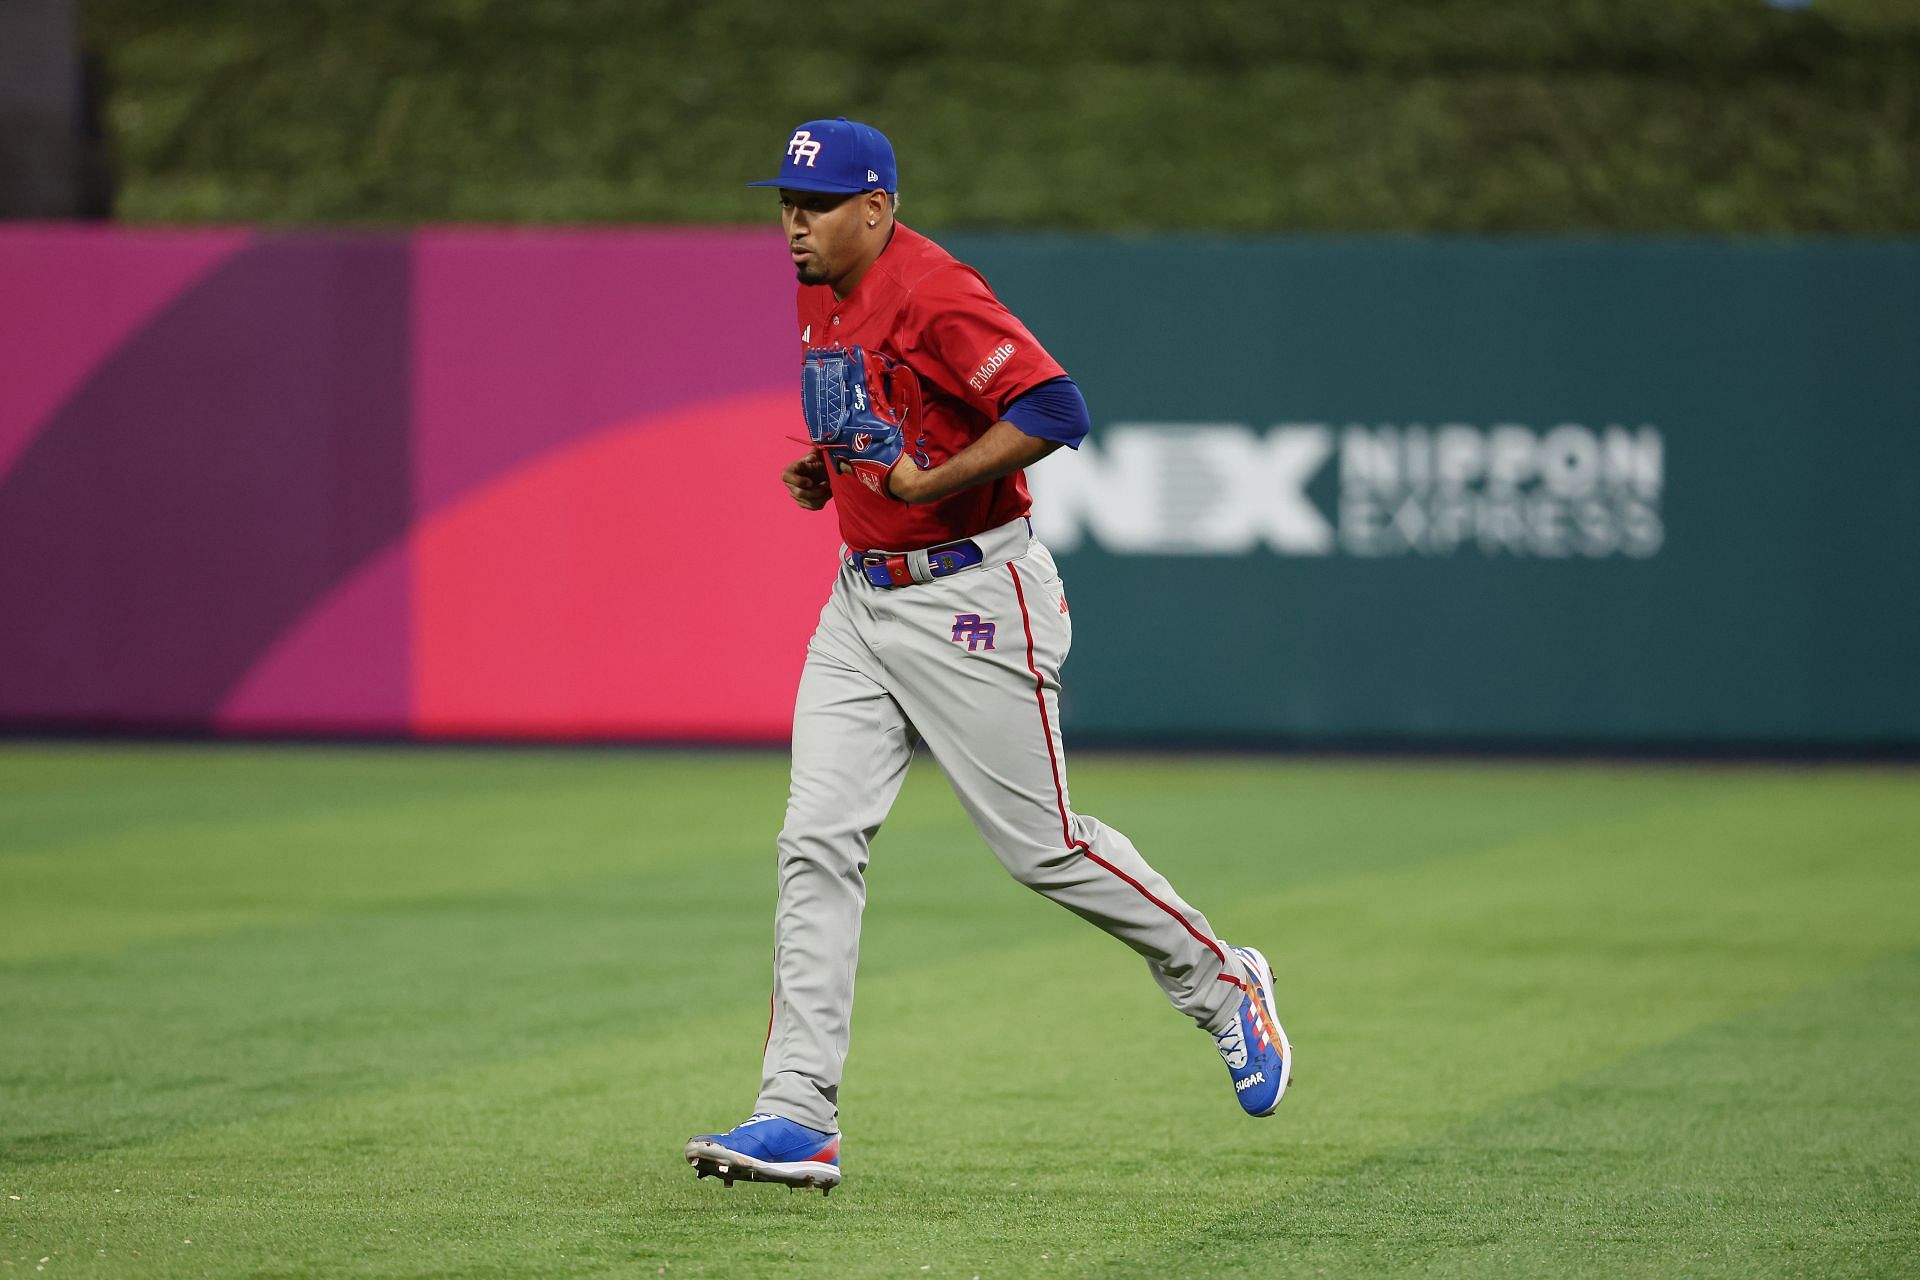 Edwin Diaz injury update: Mets closer likely to miss season after